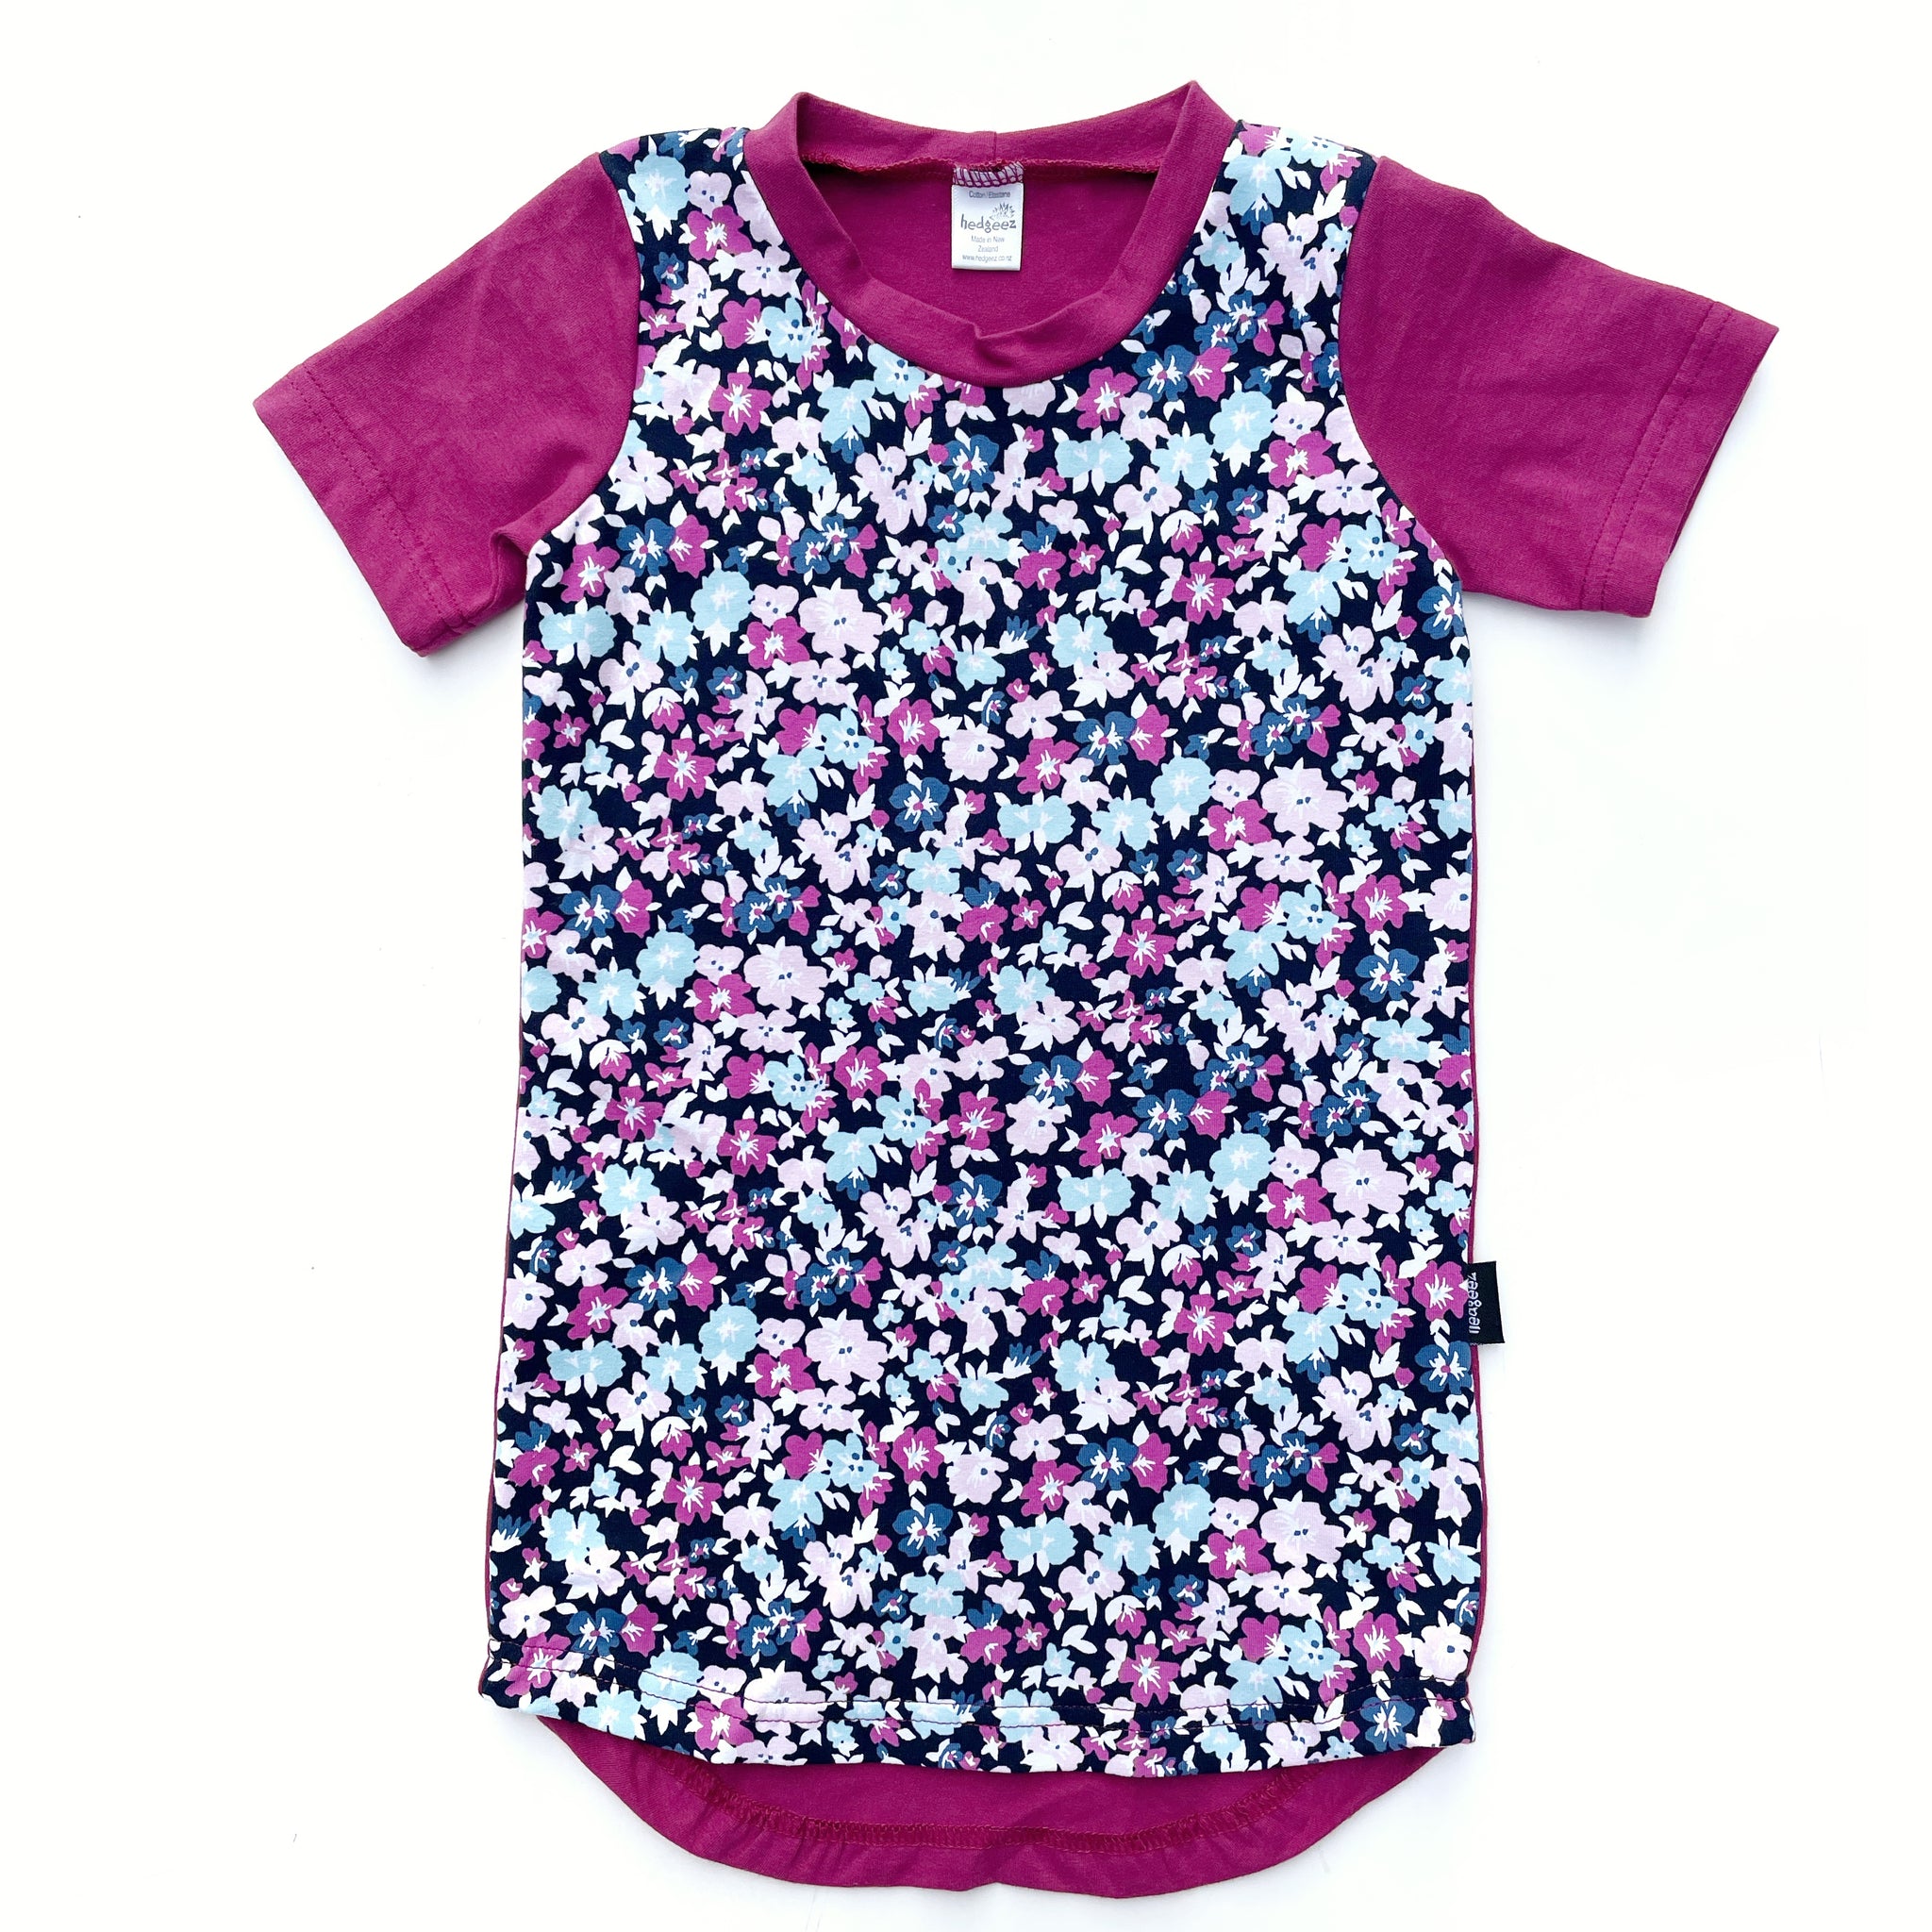 T-Shirt Dress - Navy Floral with Pink